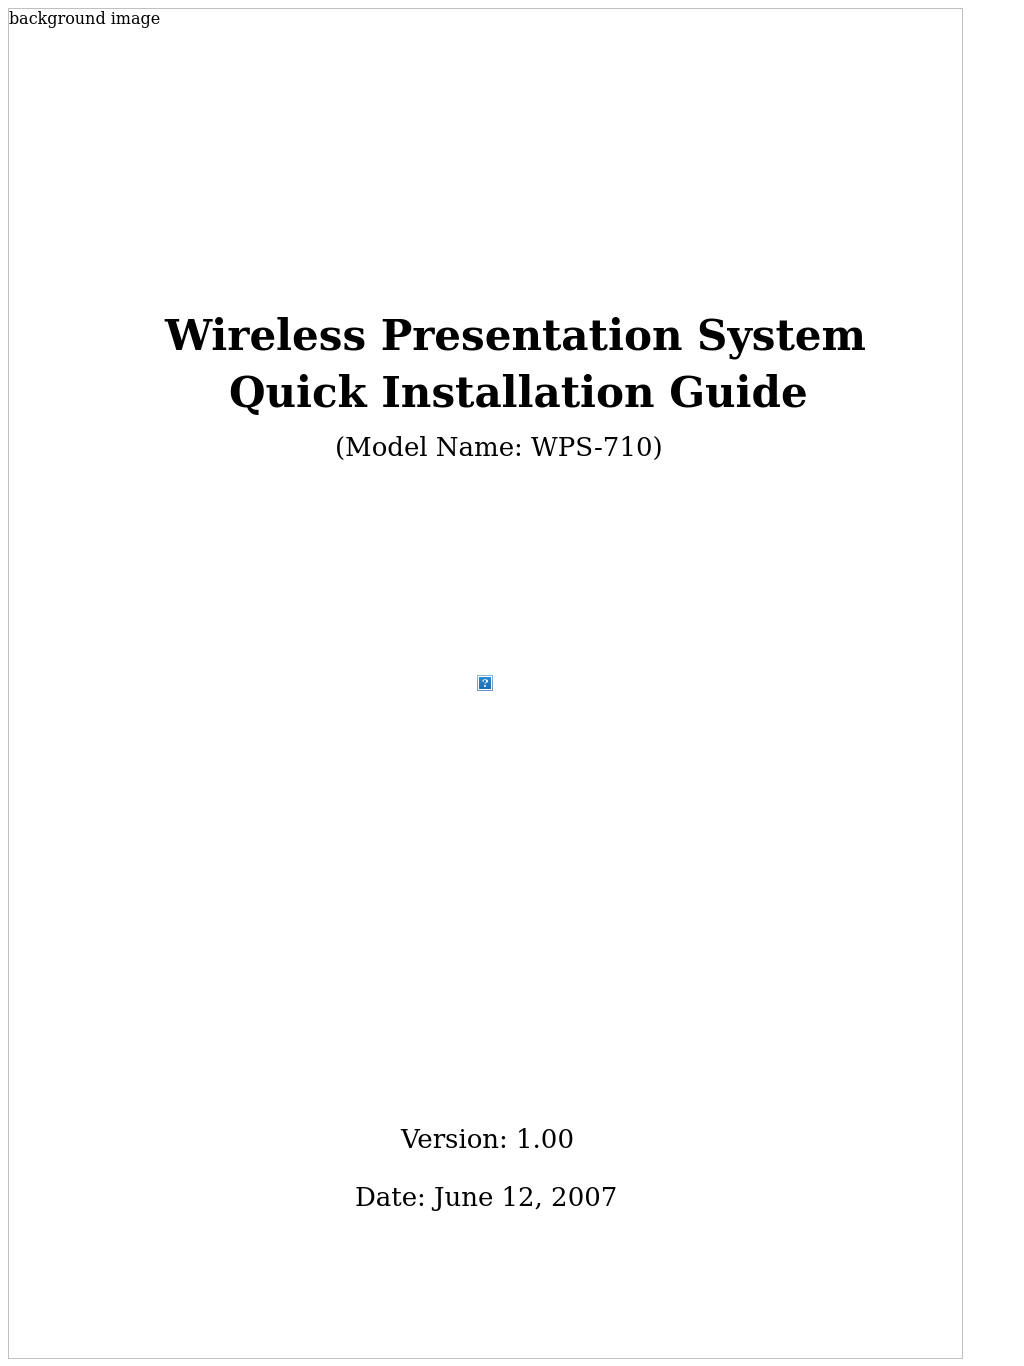 WPS-720 Quick Install Guide